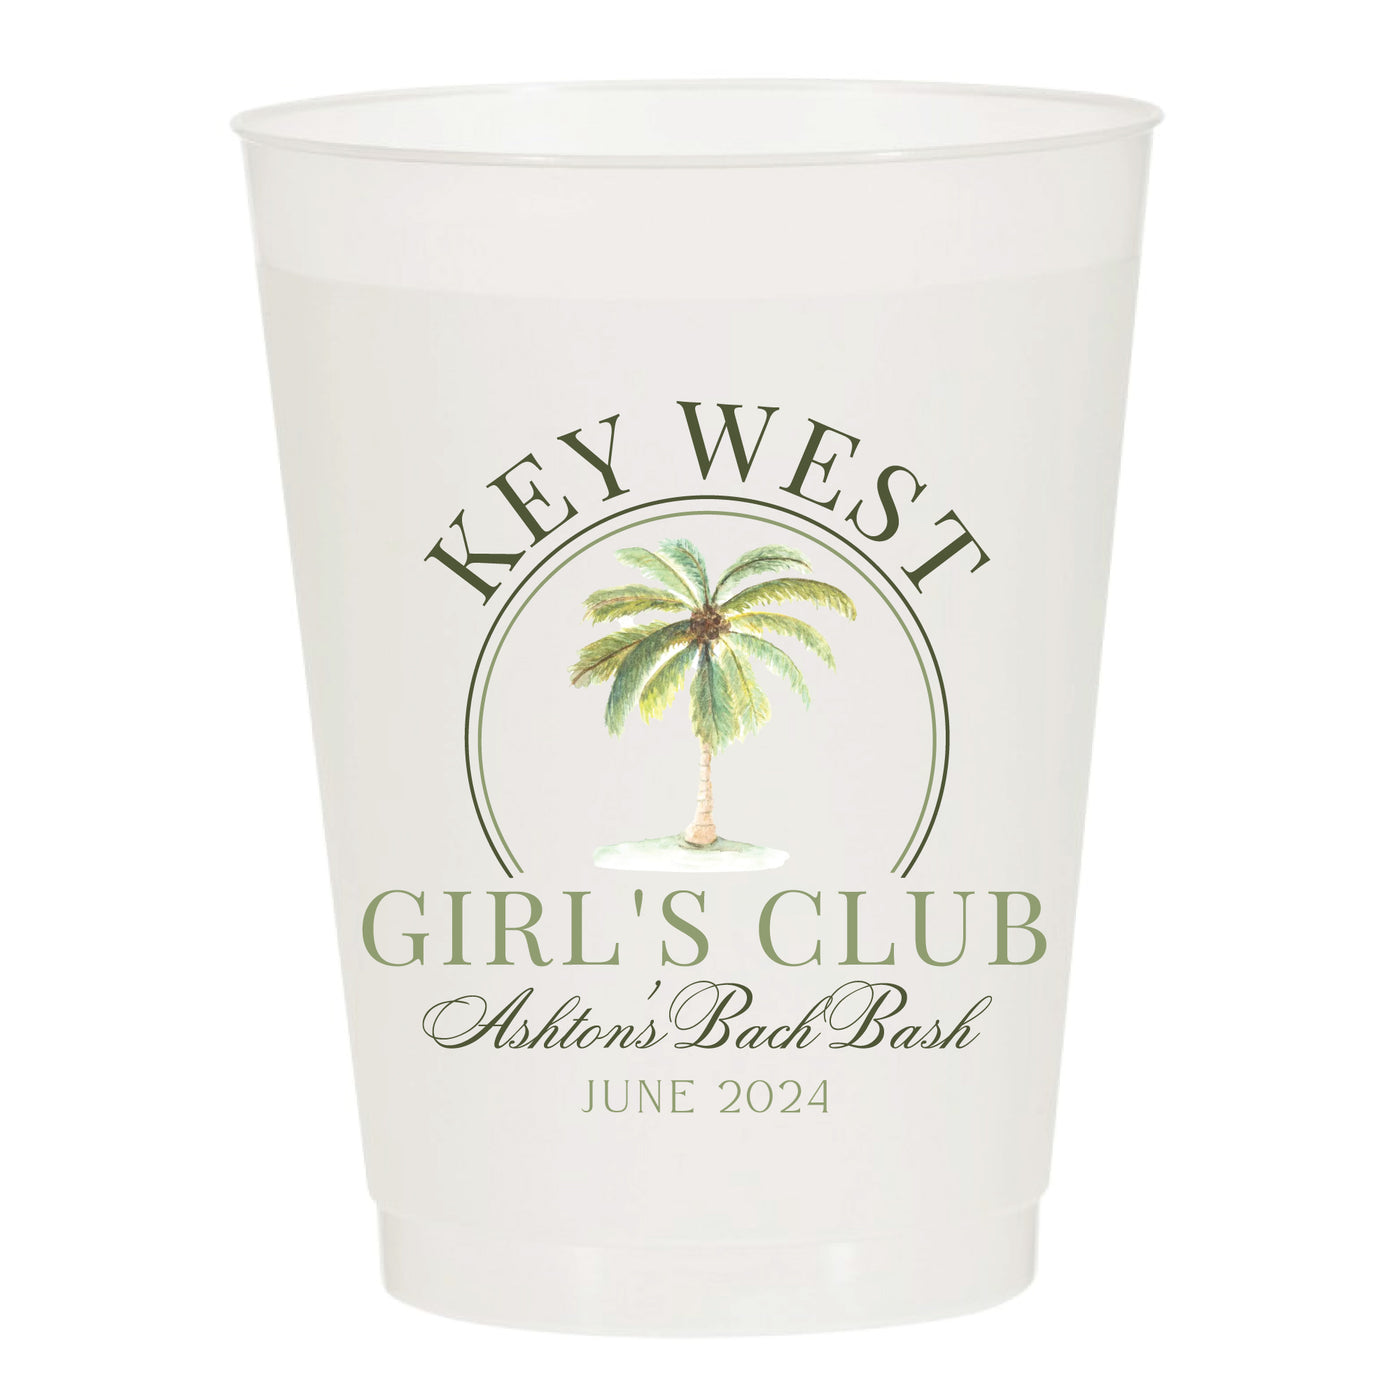 Tropical (any location) Girl's Club Bachelorette Frosted Full Color Printed Shatterproof Cups